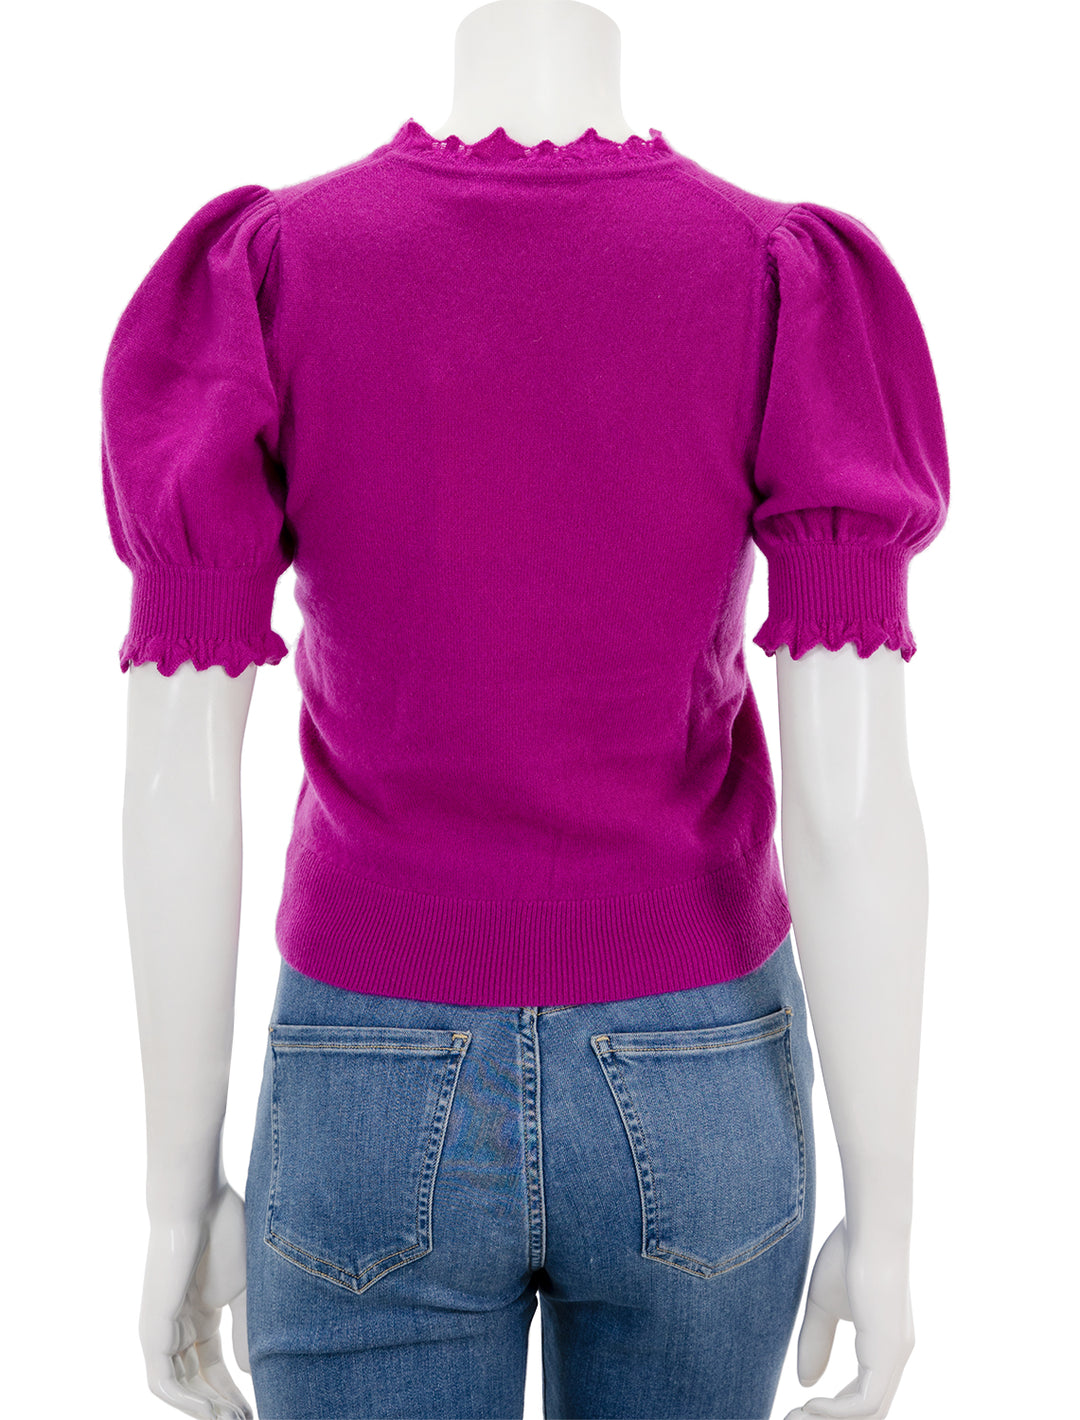 Back view of Ulla Johnson's lotta top in thistle.